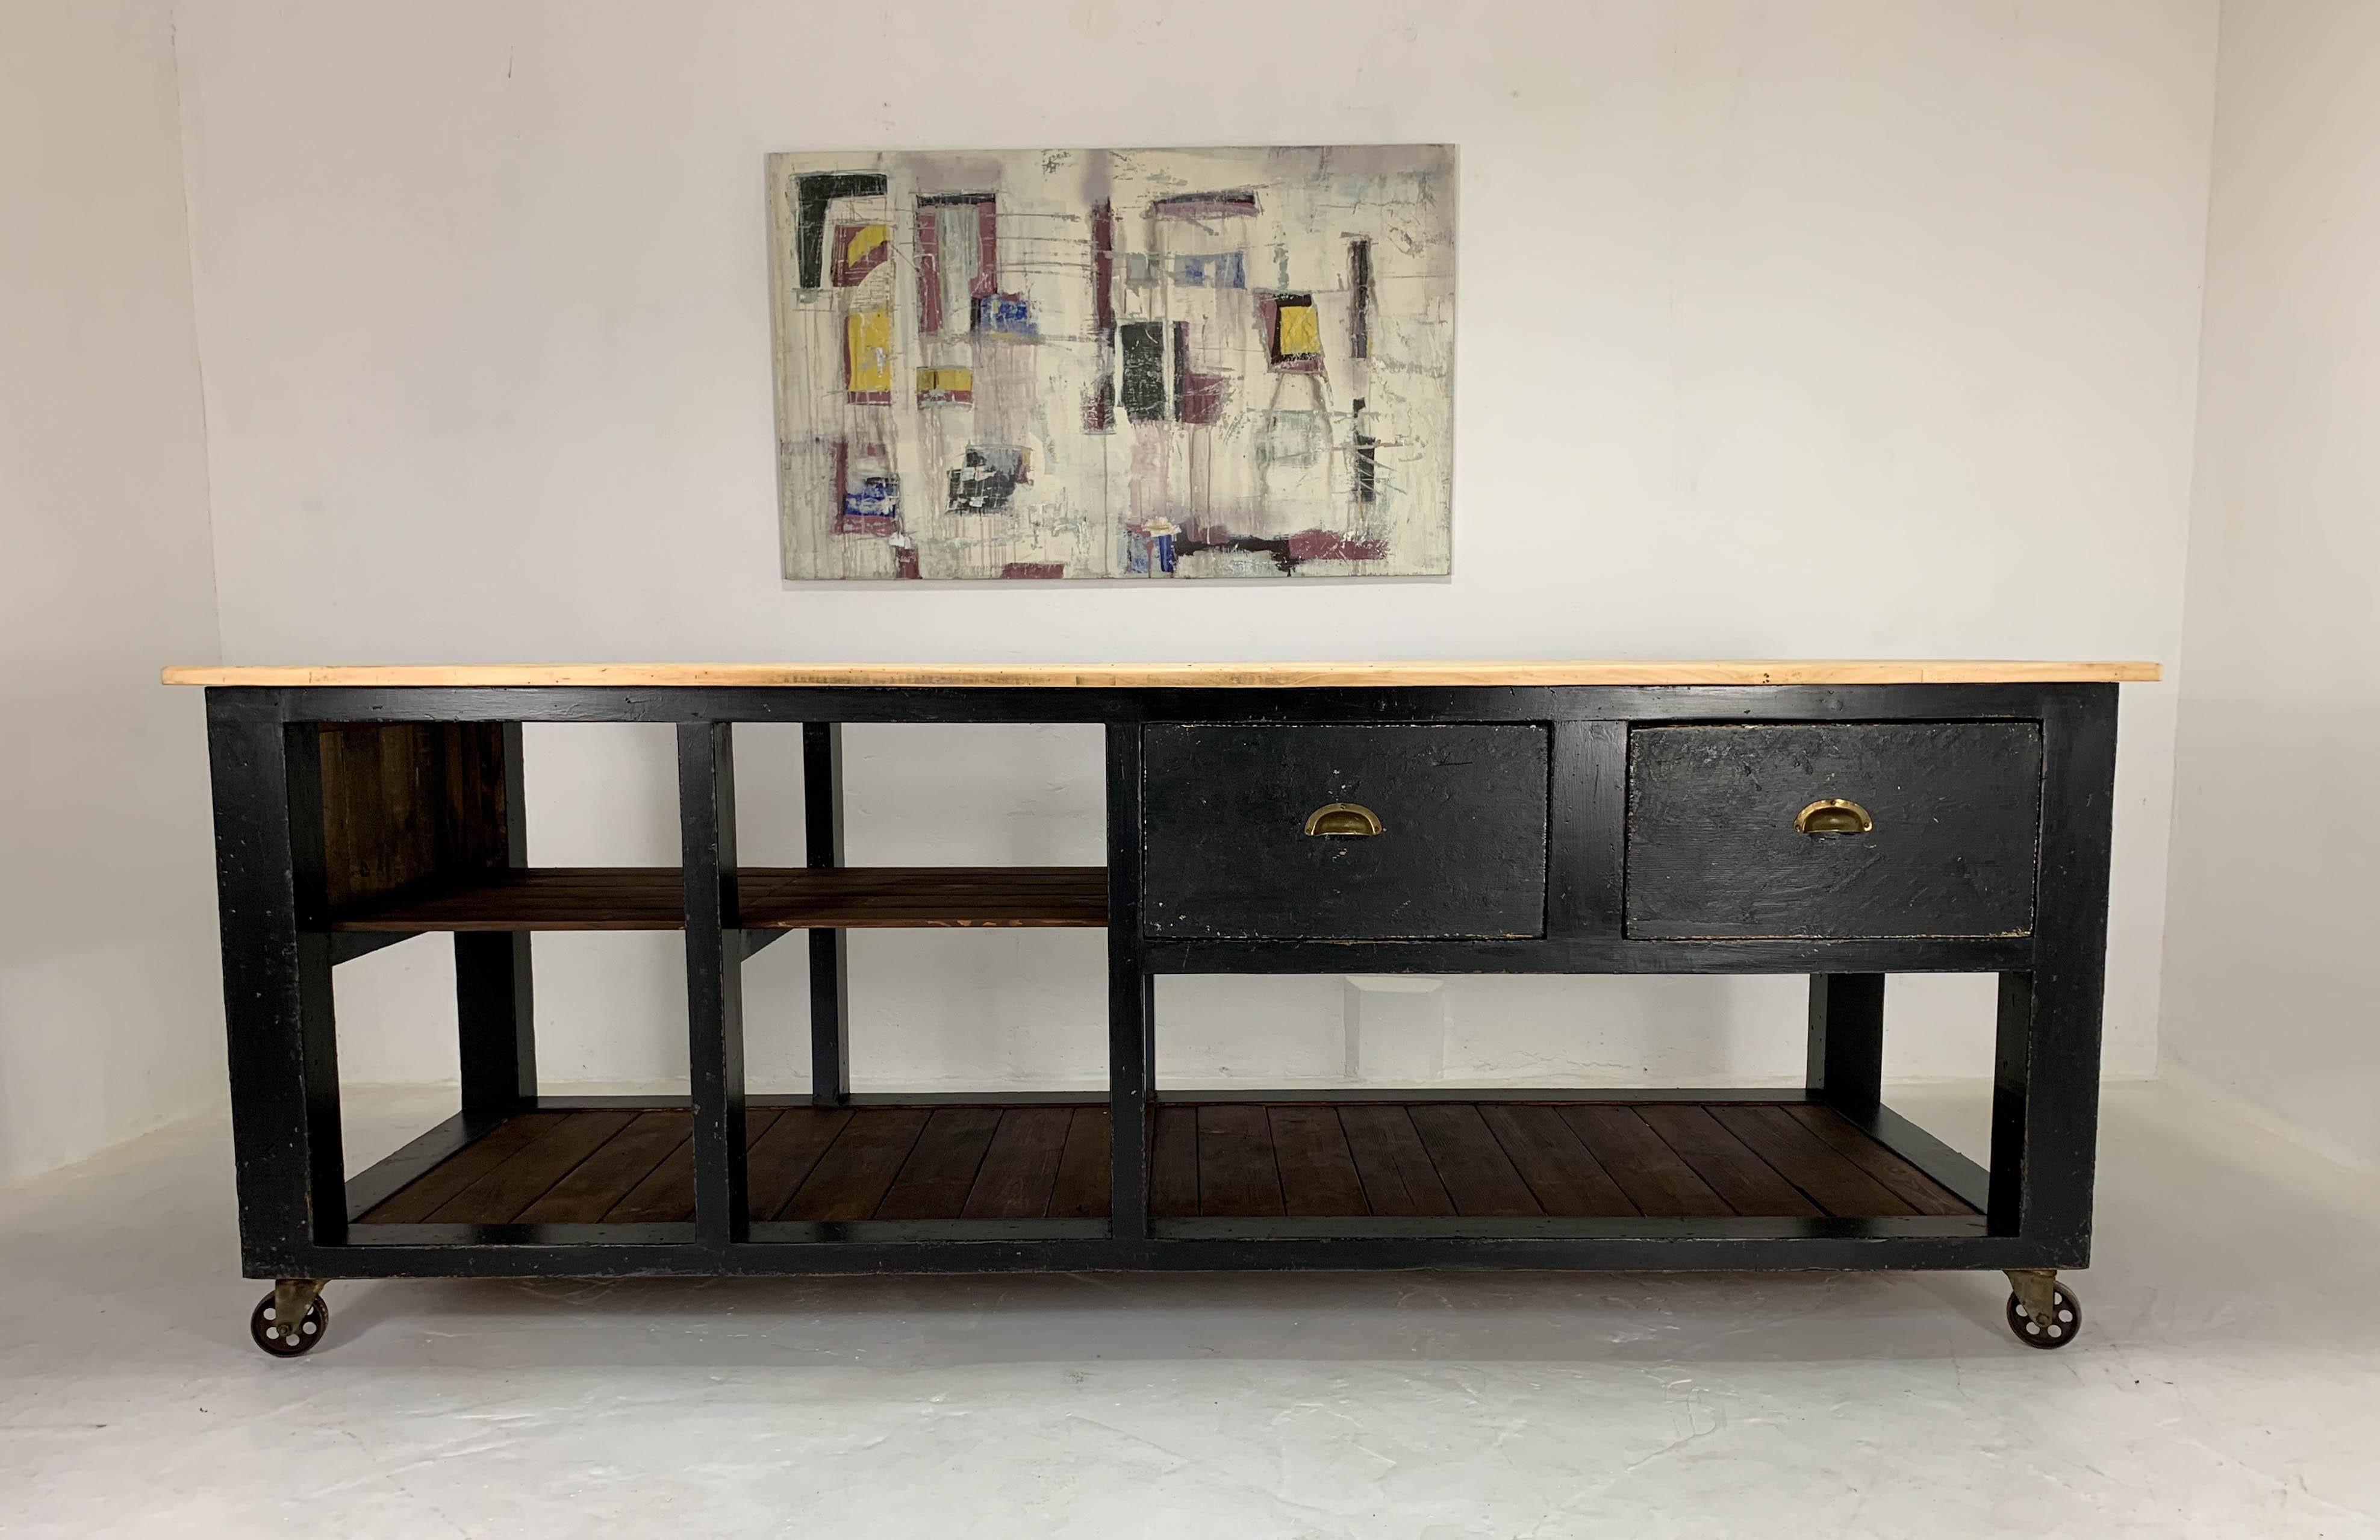 Vintage Baker's table dating from the 1940s, which was part of a clearance we did on an old bakery in Carmarthen- this one was found in an outhouse. The frame has been heavily restored, painted black and distressed. There are two original drawers to